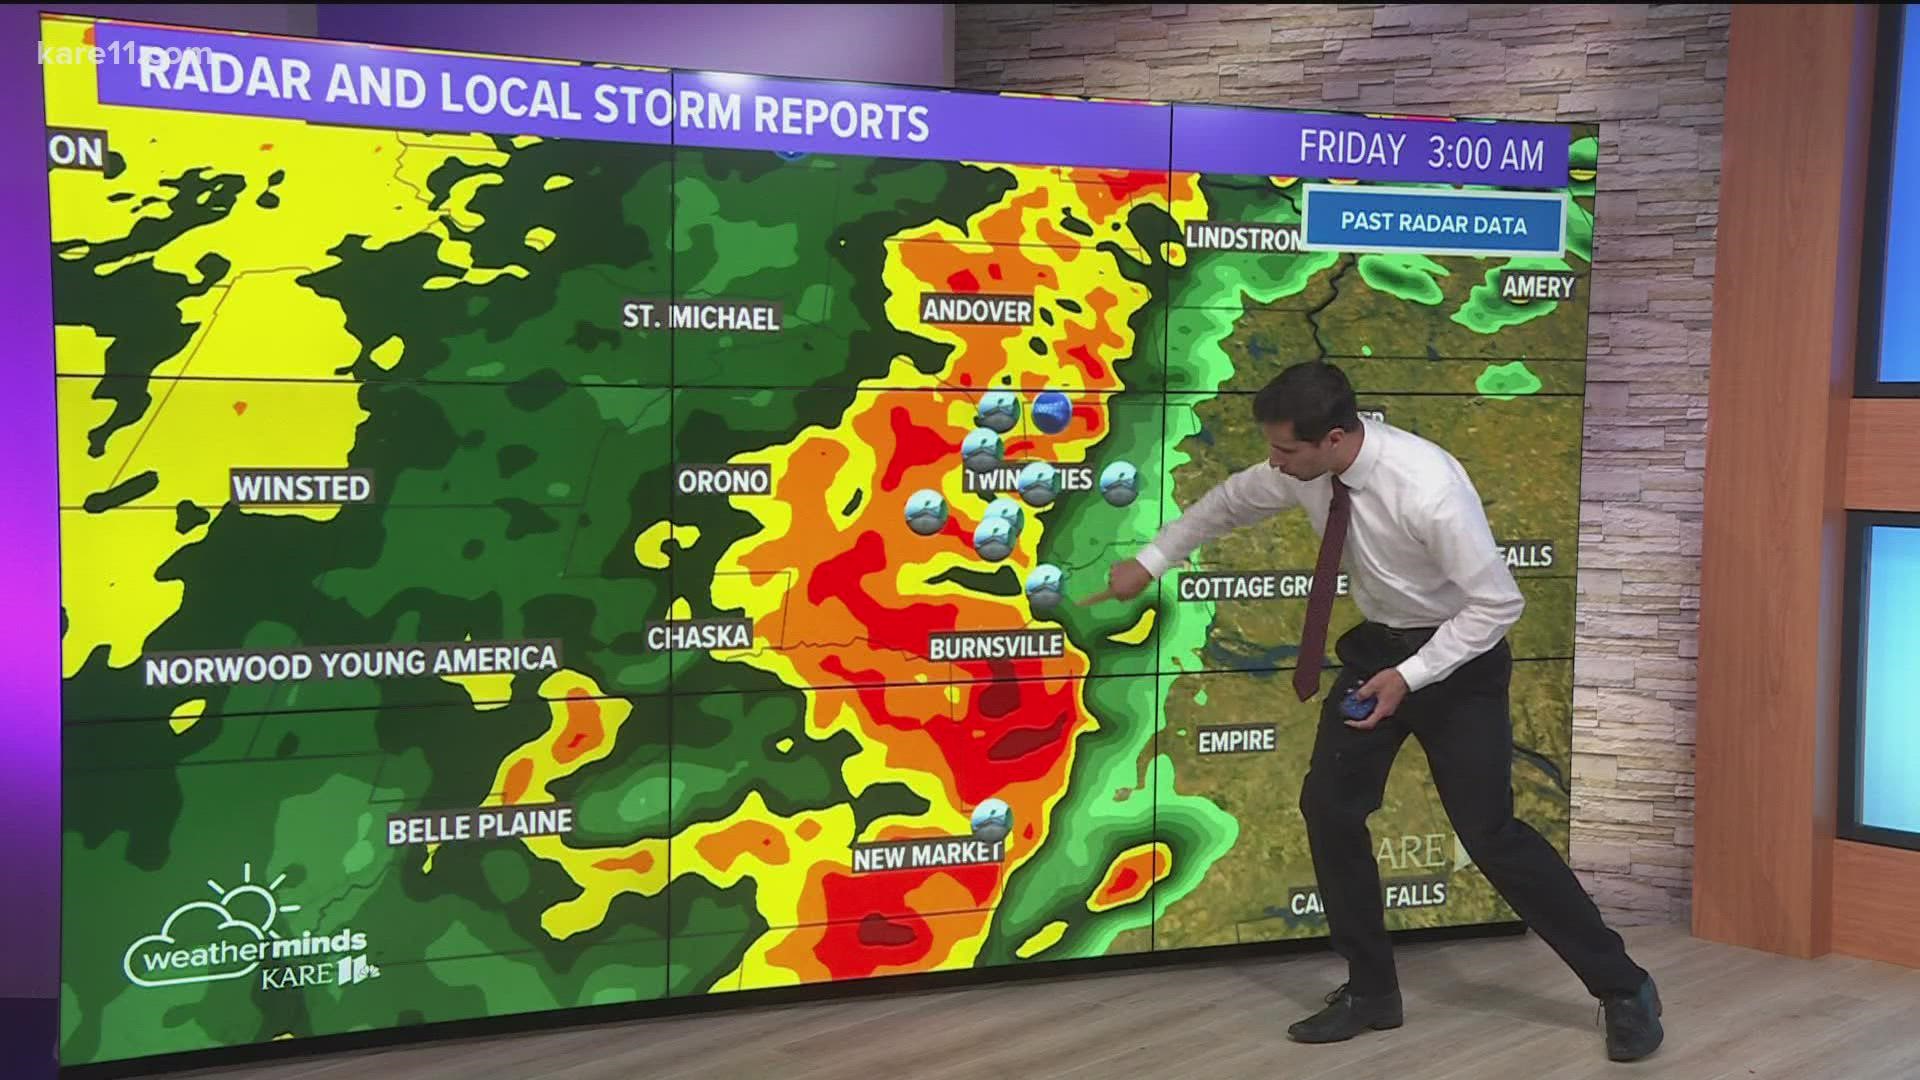 As communities clean up from last weekend's storms, Ben explains spin-up tornadoes.